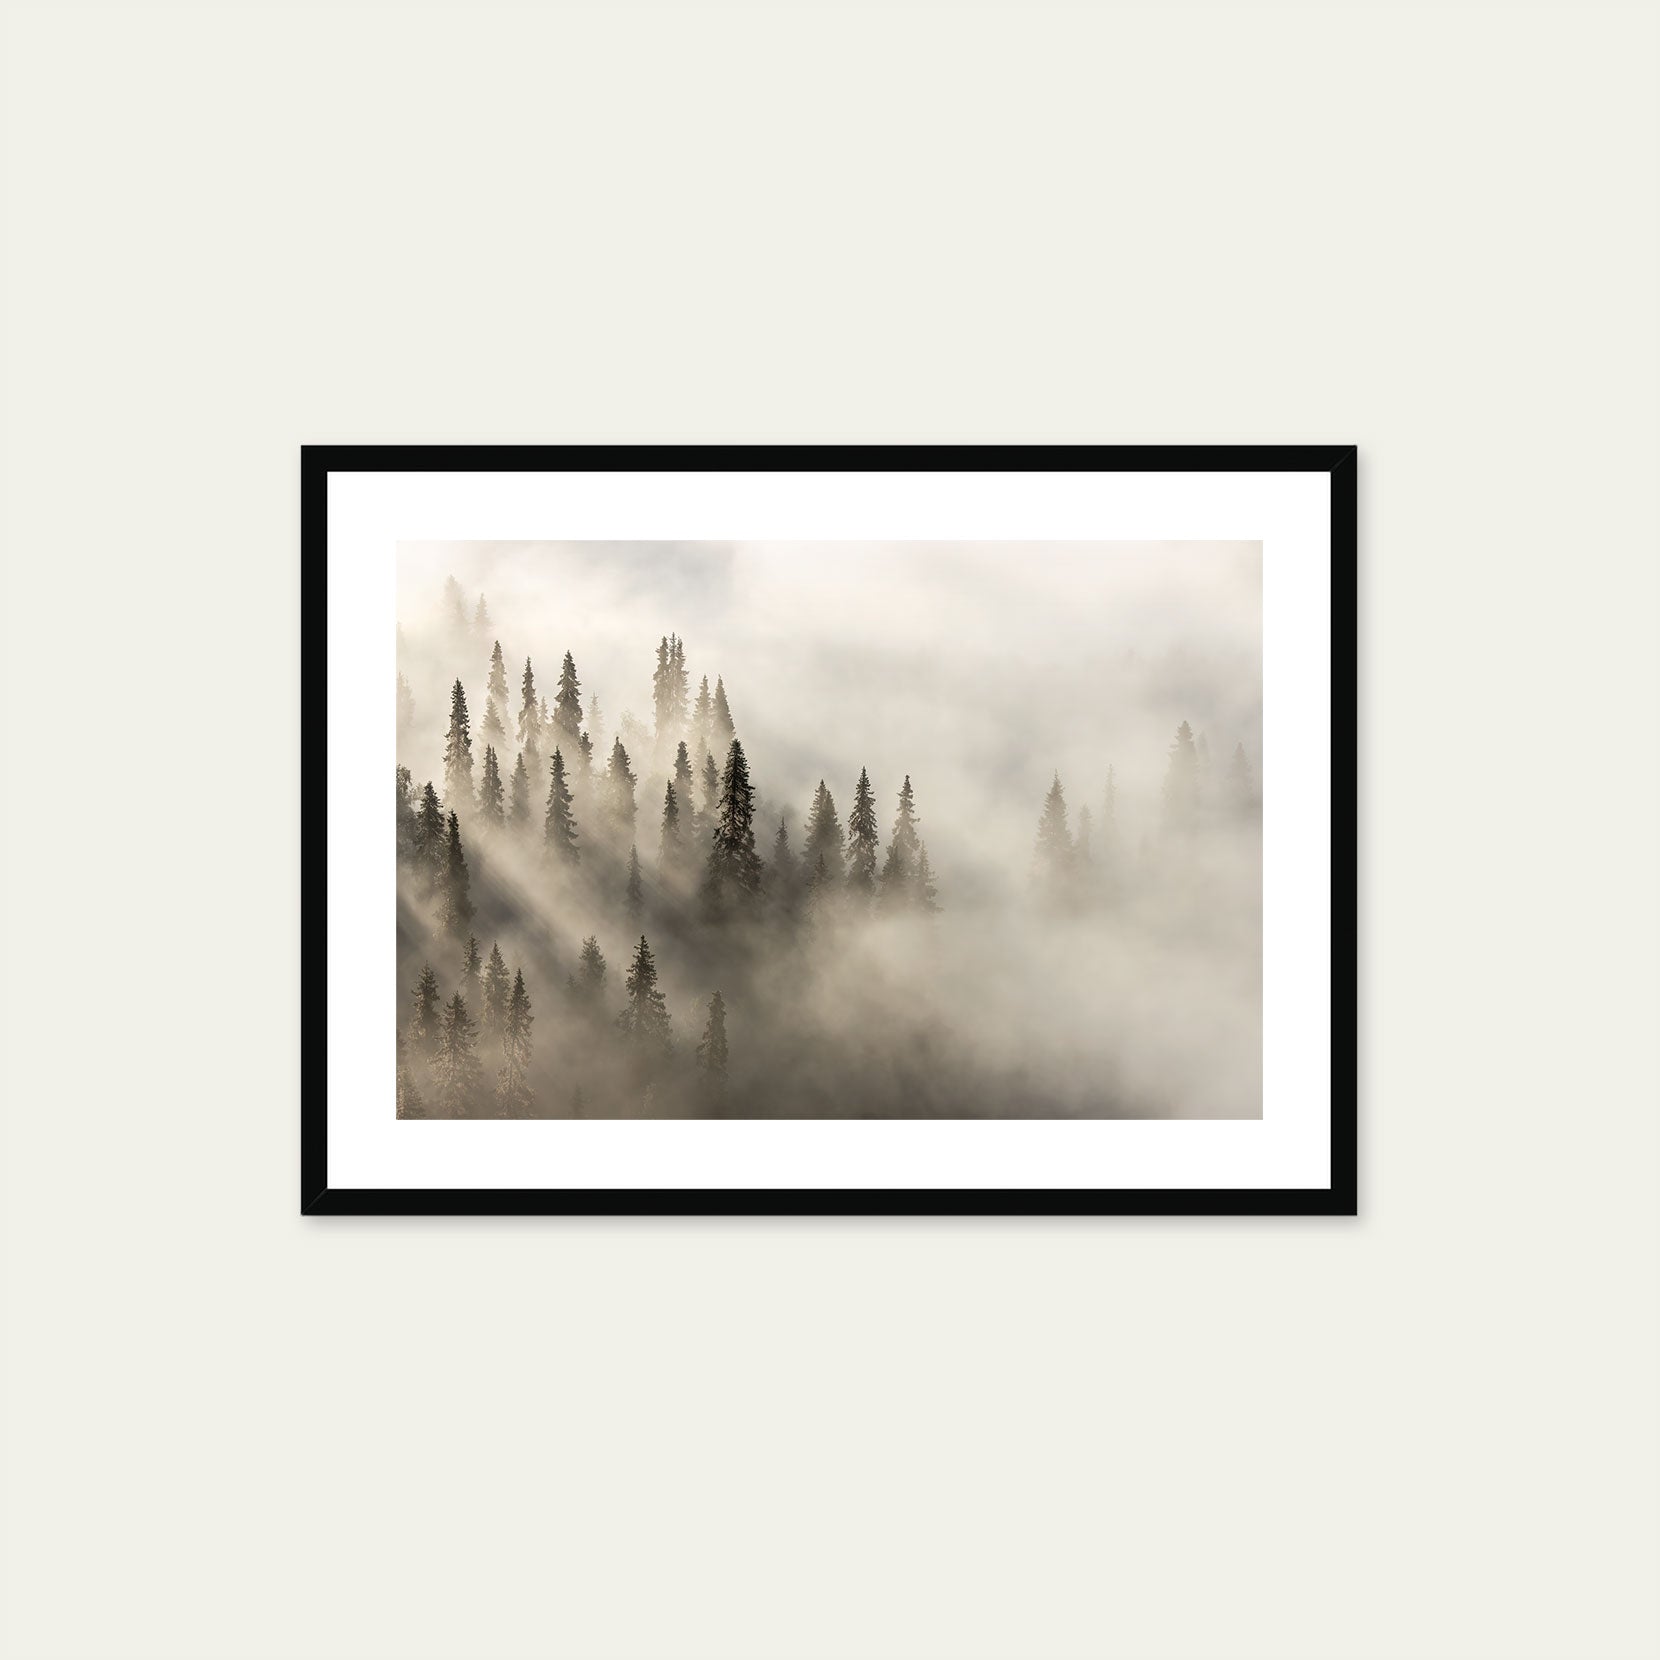 A black framed print of a fog covered forest at dawn